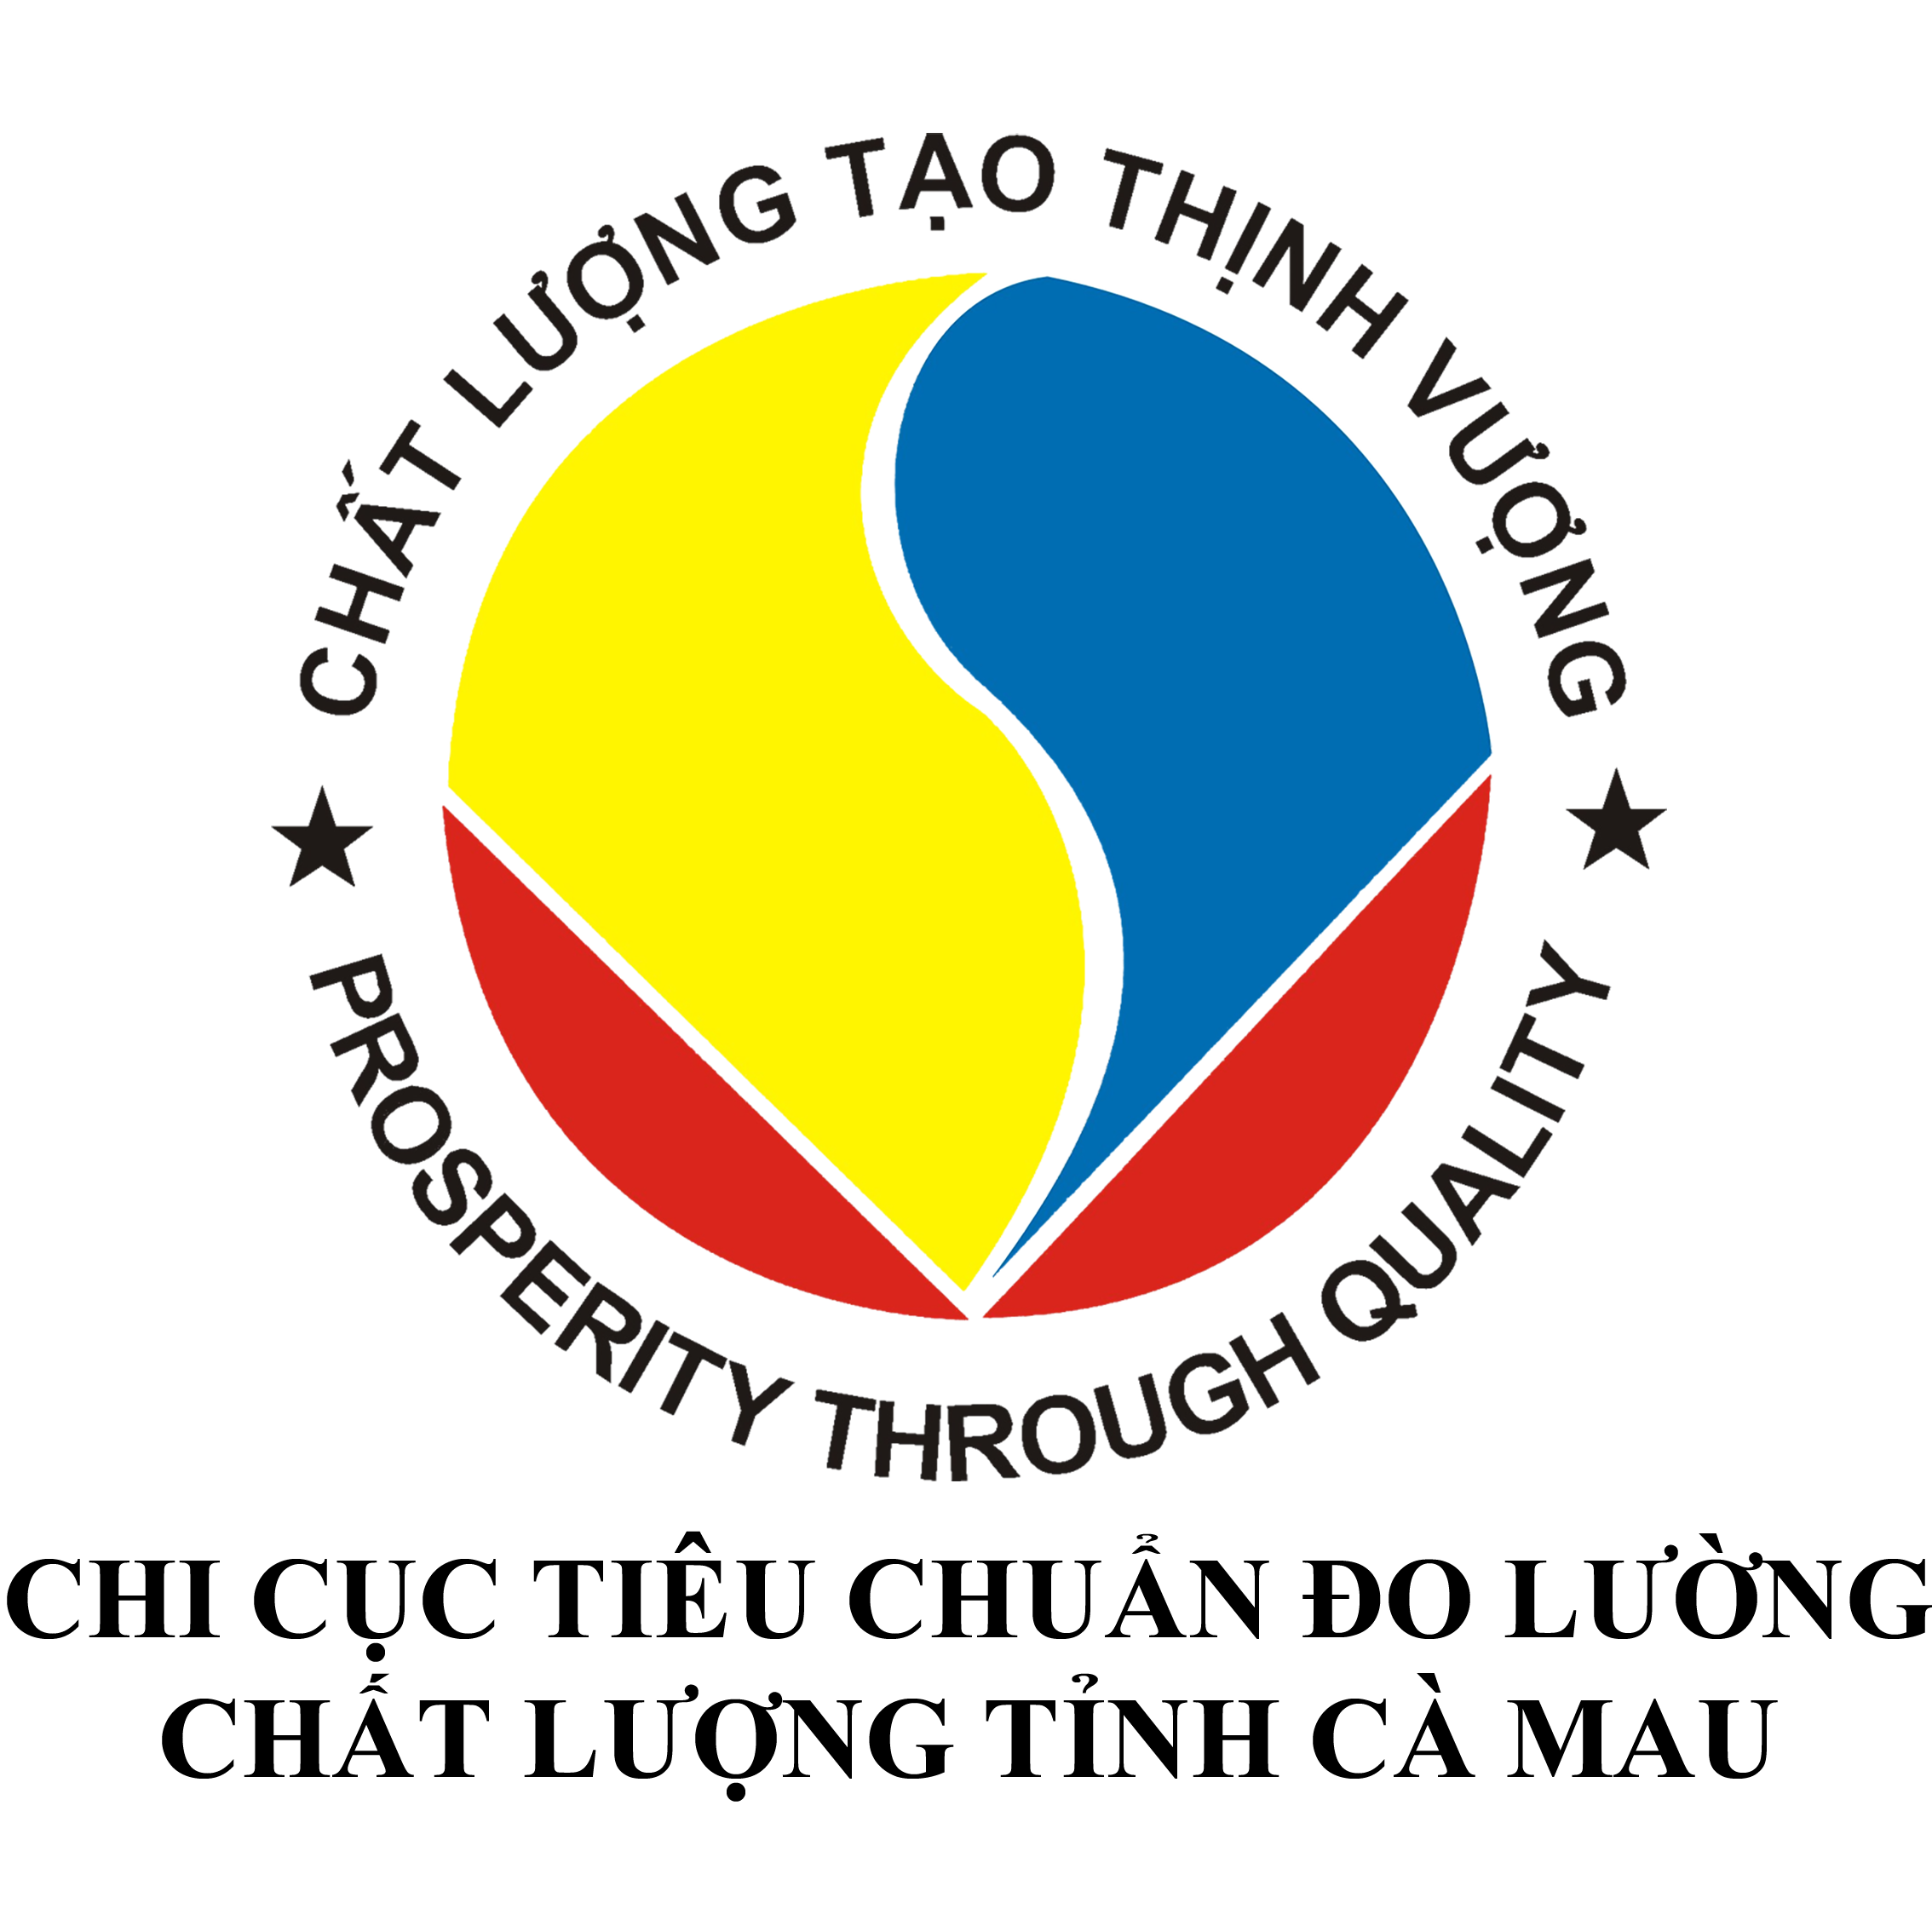 Department of Standards, Metrology and Quality (DSMQ) of Ca Mau